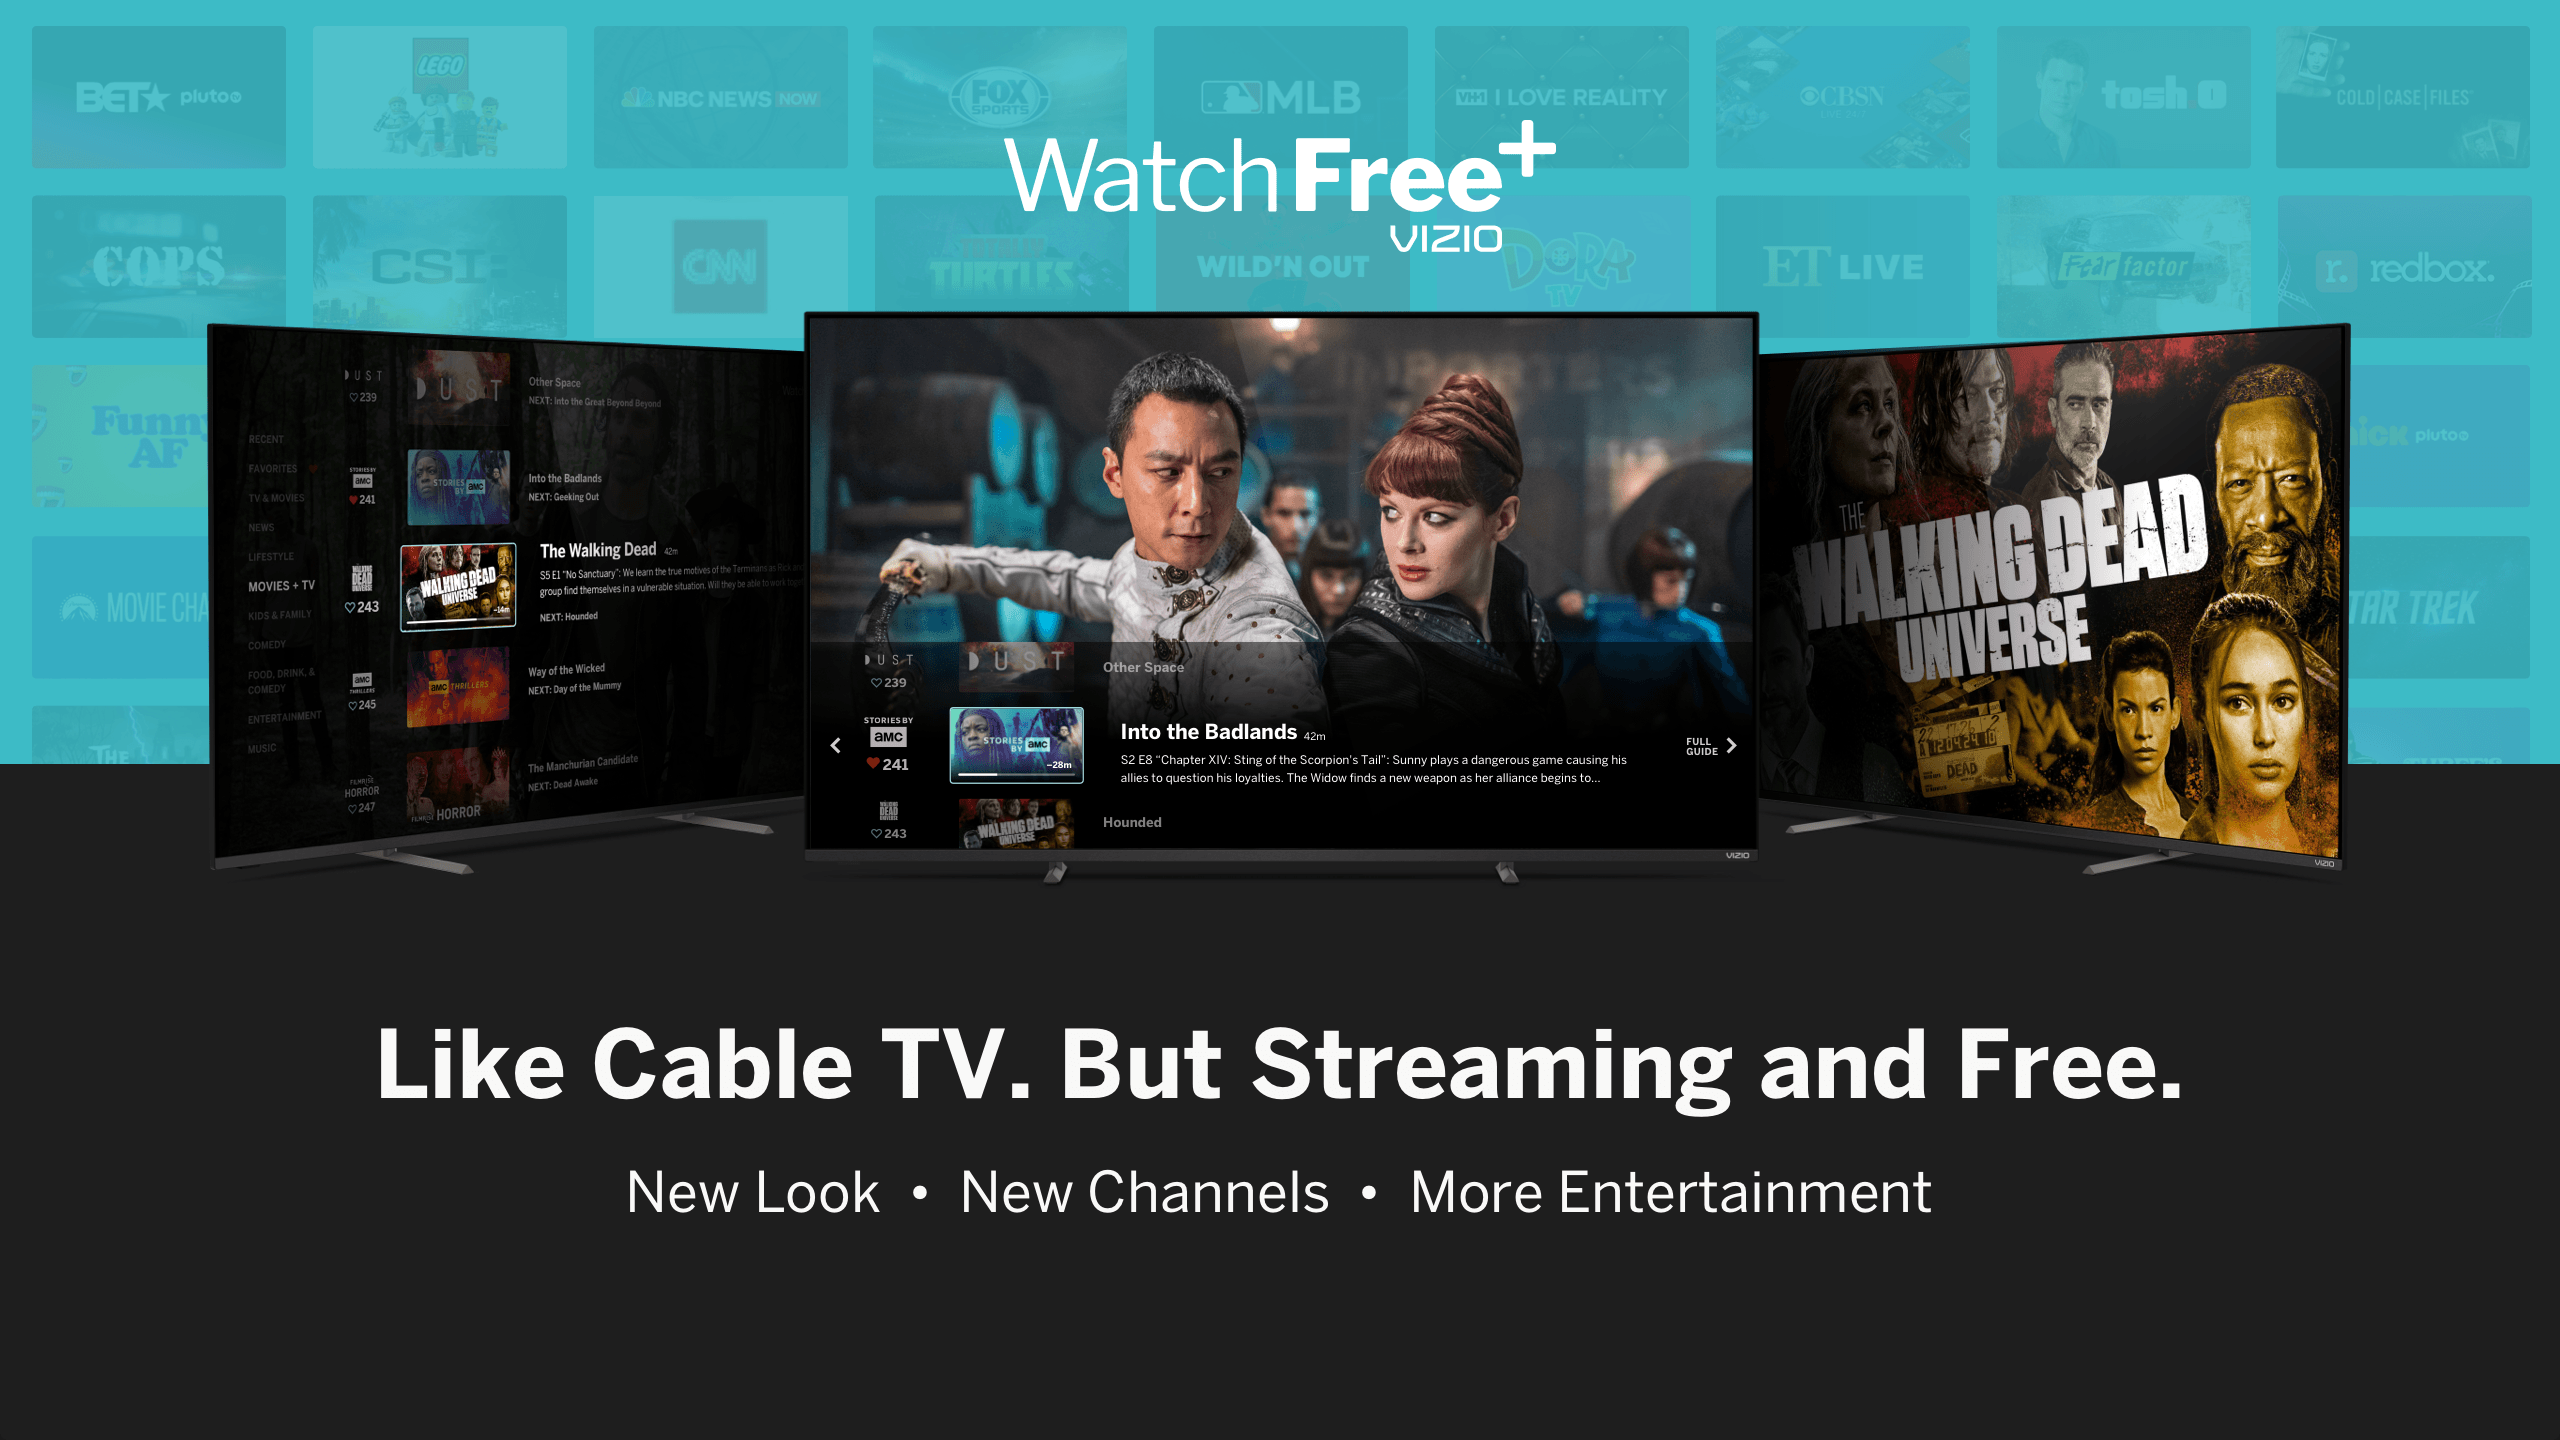 VIZIO WatchFree+ Adds On-Demand Content From TCD Including ‘Paranormal Files,”Coolest Places on Earth’